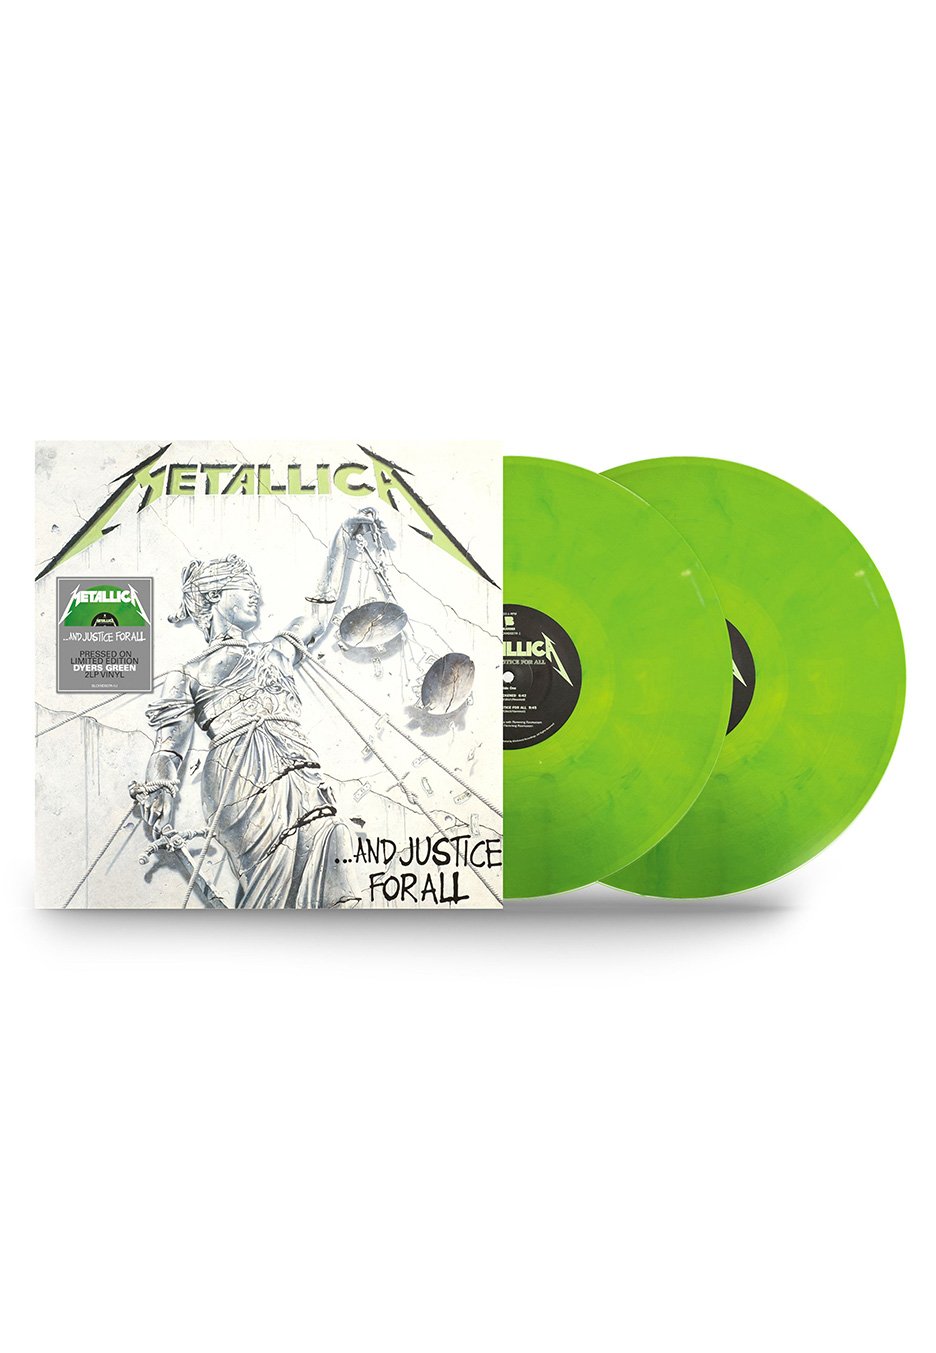 Metallica - ...And Justice For All Ltd. Dyers Green - Colored 2 Vinyl